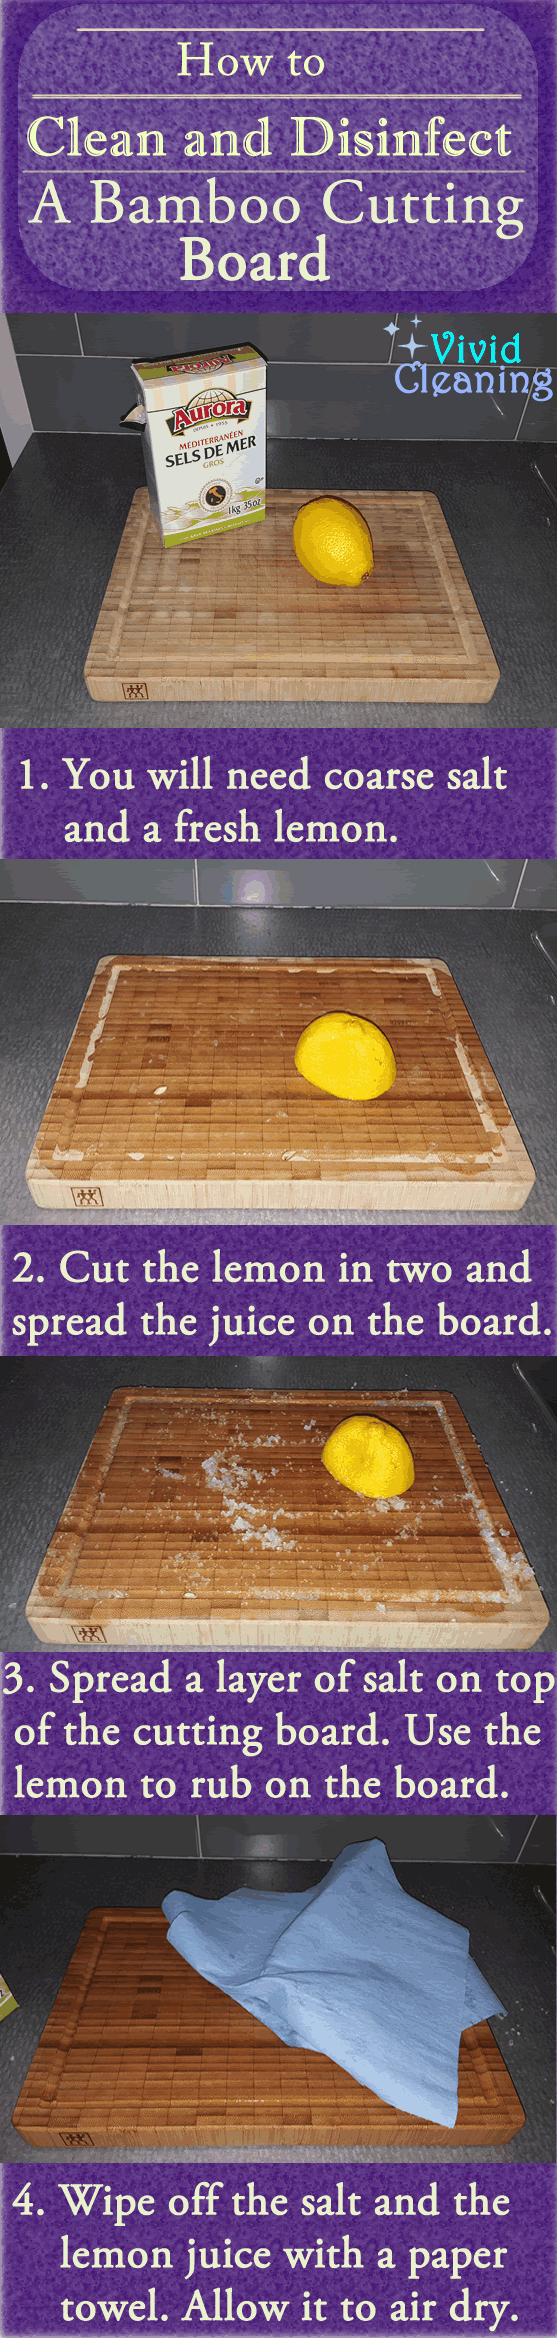 How to Clean and Disinfect a Bamboo Cutting Board